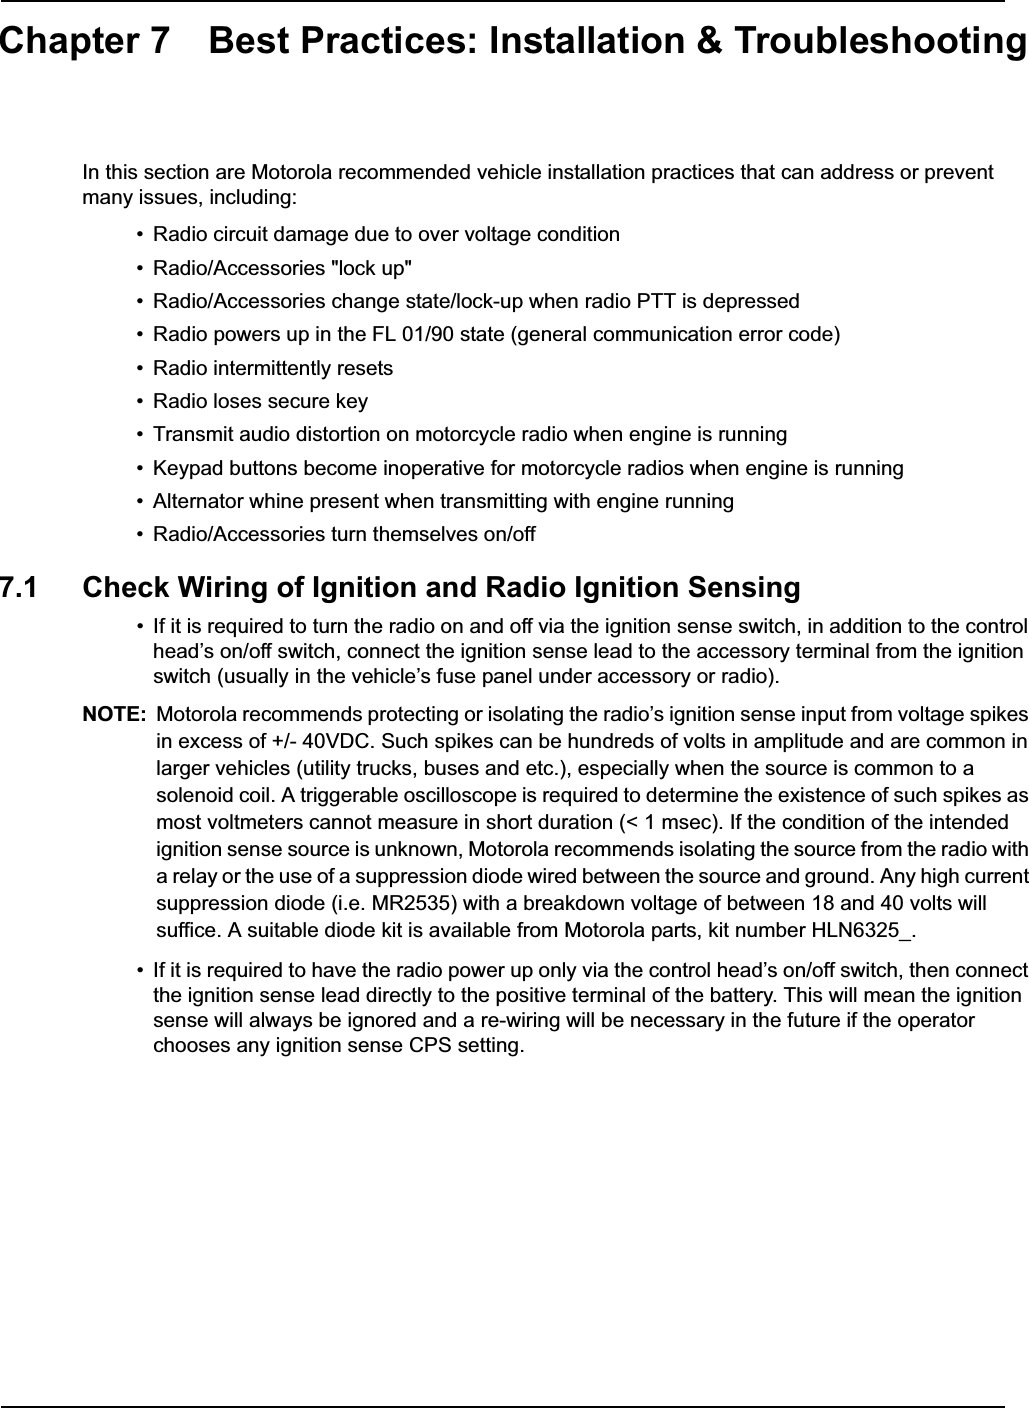 Chapter 7 Best Practices: Installation &amp; TroubleshootingIn this section are Motorola recommended vehicle installation practices that can address or prevent many issues, including:• Radio circuit damage due to over voltage condition• Radio/Accessories &quot;lock up&quot;• Radio/Accessories change state/lock-up when radio PTT is depressed• Radio powers up in the FL 01/90 state (general communication error code)• Radio intermittently resets• Radio loses secure key• Transmit audio distortion on motorcycle radio when engine is running• Keypad buttons become inoperative for motorcycle radios when engine is running• Alternator whine present when transmitting with engine running• Radio/Accessories turn themselves on/off7.1 Check Wiring of Ignition and Radio Ignition Sensing• If it is required to turn the radio on and off via the ignition sense switch, in addition to the control head’s on/off switch, connect the ignition sense lead to the accessory terminal from the ignition switch (usually in the vehicle’s fuse panel under accessory or radio).NOTE: Motorola recommends protecting or isolating the radio’s ignition sense input from voltage spikes in excess of +/- 40VDC. Such spikes can be hundreds of volts in amplitude and are common in larger vehicles (utility trucks, buses and etc.), especially when the source is common to a solenoid coil. A triggerable oscilloscope is required to determine the existence of such spikes as most voltmeters cannot measure in short duration (&lt; 1 msec). If the condition of the intended ignition sense source is unknown, Motorola recommends isolating the source from the radio with a relay or the use of a suppression diode wired between the source and ground. Any high current suppression diode (i.e. MR2535) with a breakdown voltage of between 18 and 40 volts will suffice. A suitable diode kit is available from Motorola parts, kit number HLN6325_.• If it is required to have the radio power up only via the control head’s on/off switch, then connect the ignition sense lead directly to the positive terminal of the battery. This will mean the ignition sense will always be ignored and a re-wiring will be necessary in the future if the operator chooses any ignition sense CPS setting. 